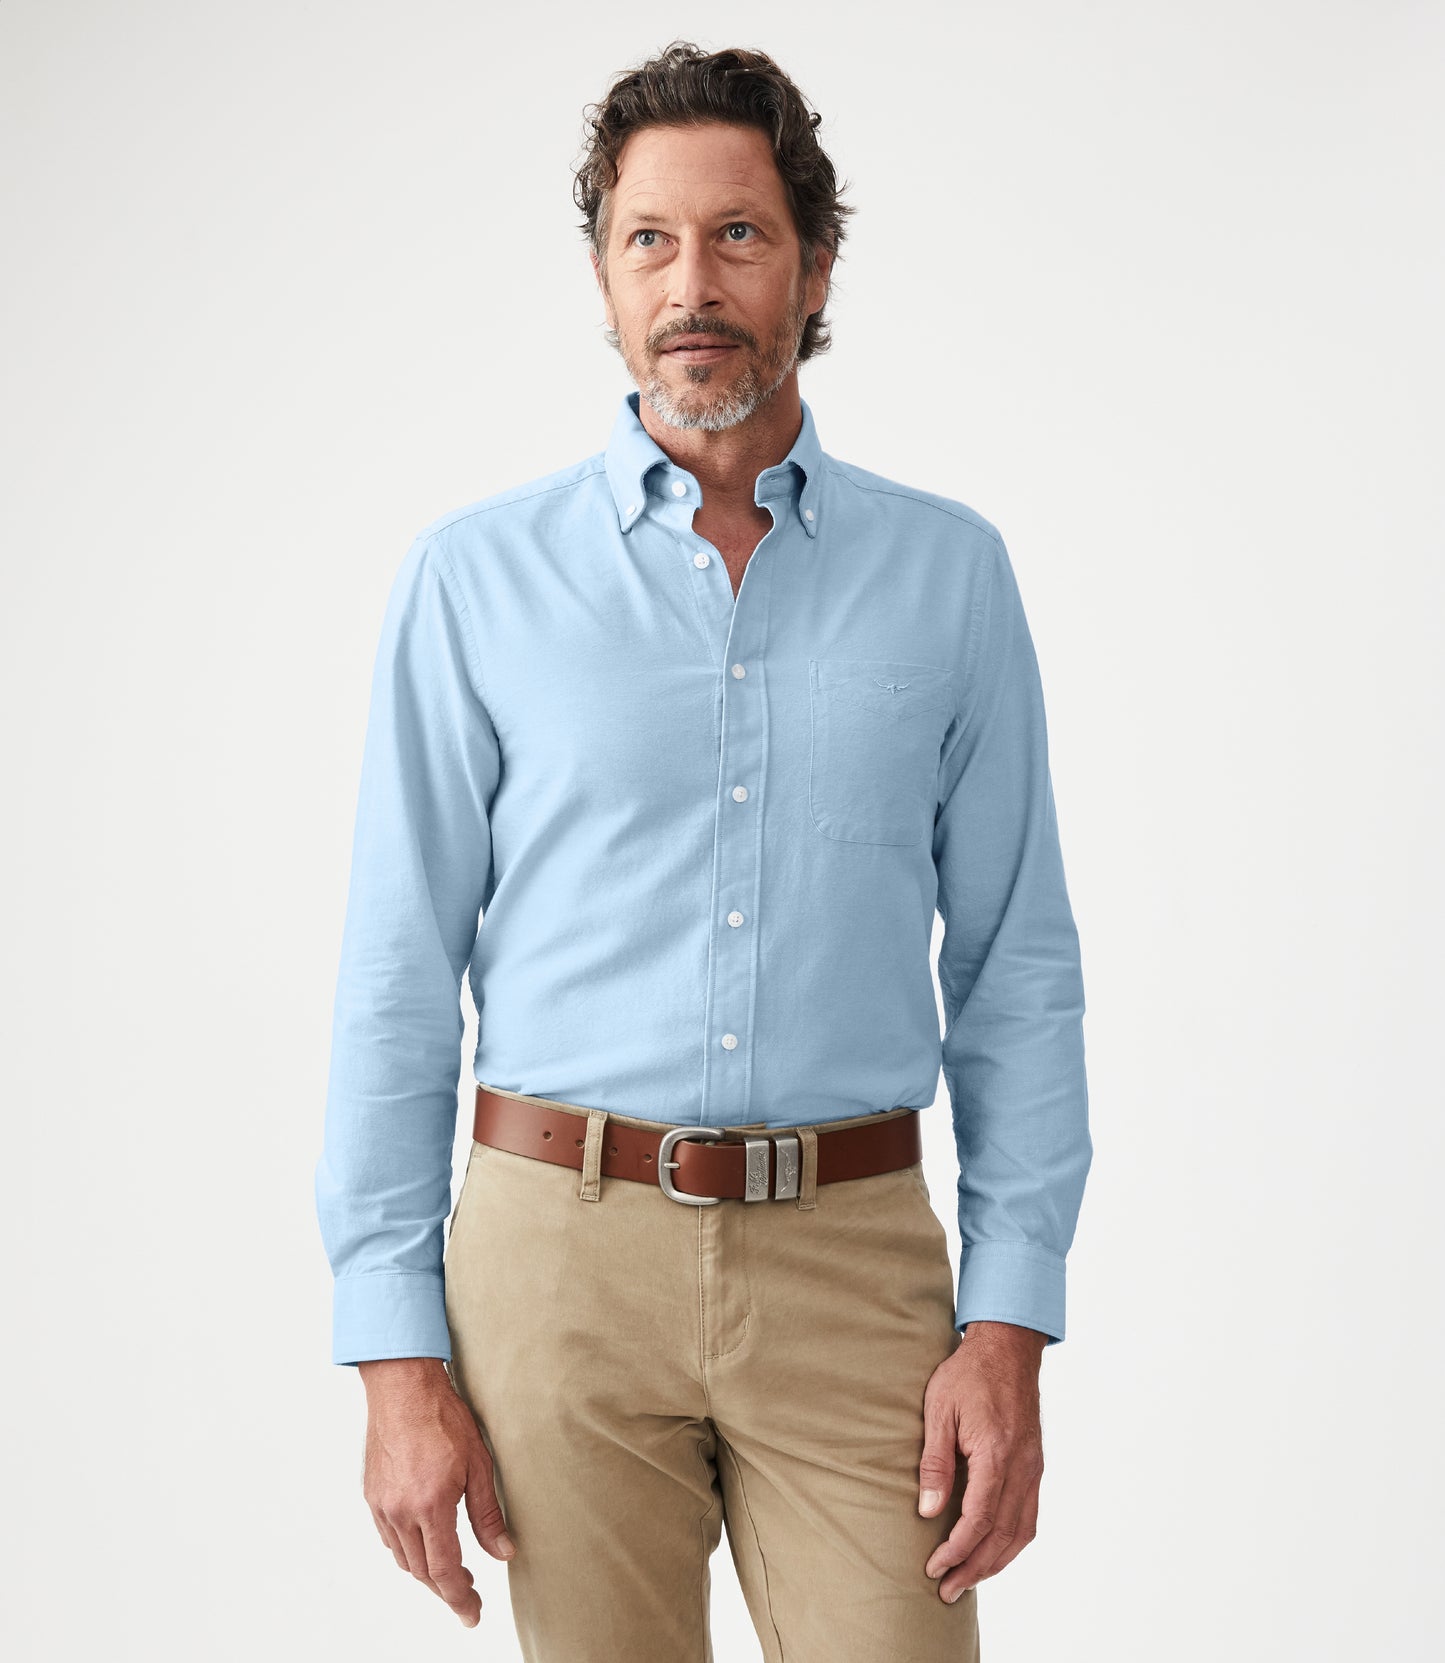 R.M Williams Shirts, The Collins Button Down Shirt in Light Blue